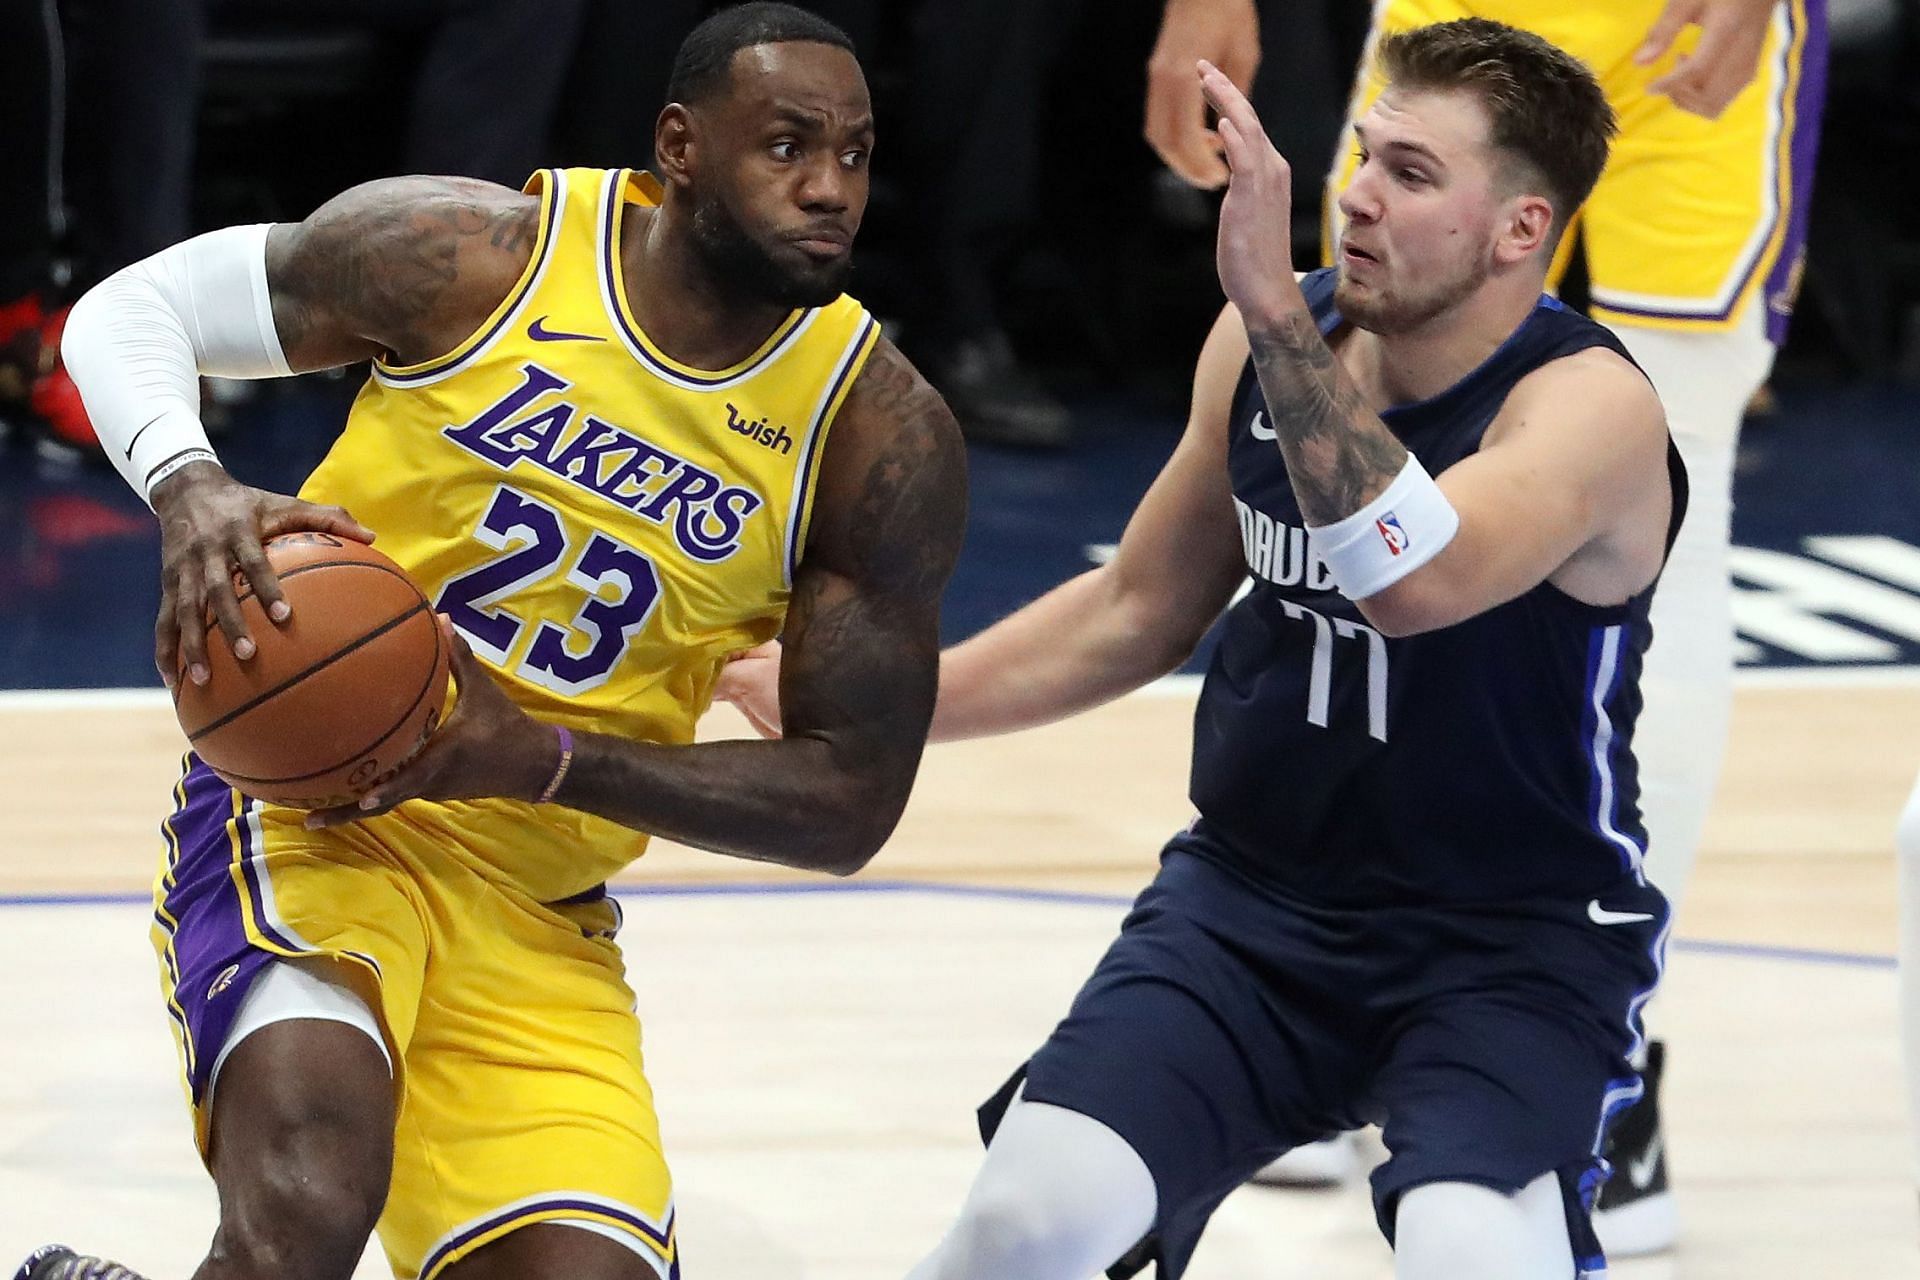 LeBron James and the LA Lakers gave up too many transition baskets to Luka Doncic and the Dallas Mavericks. [Photo: Bleacher Report]